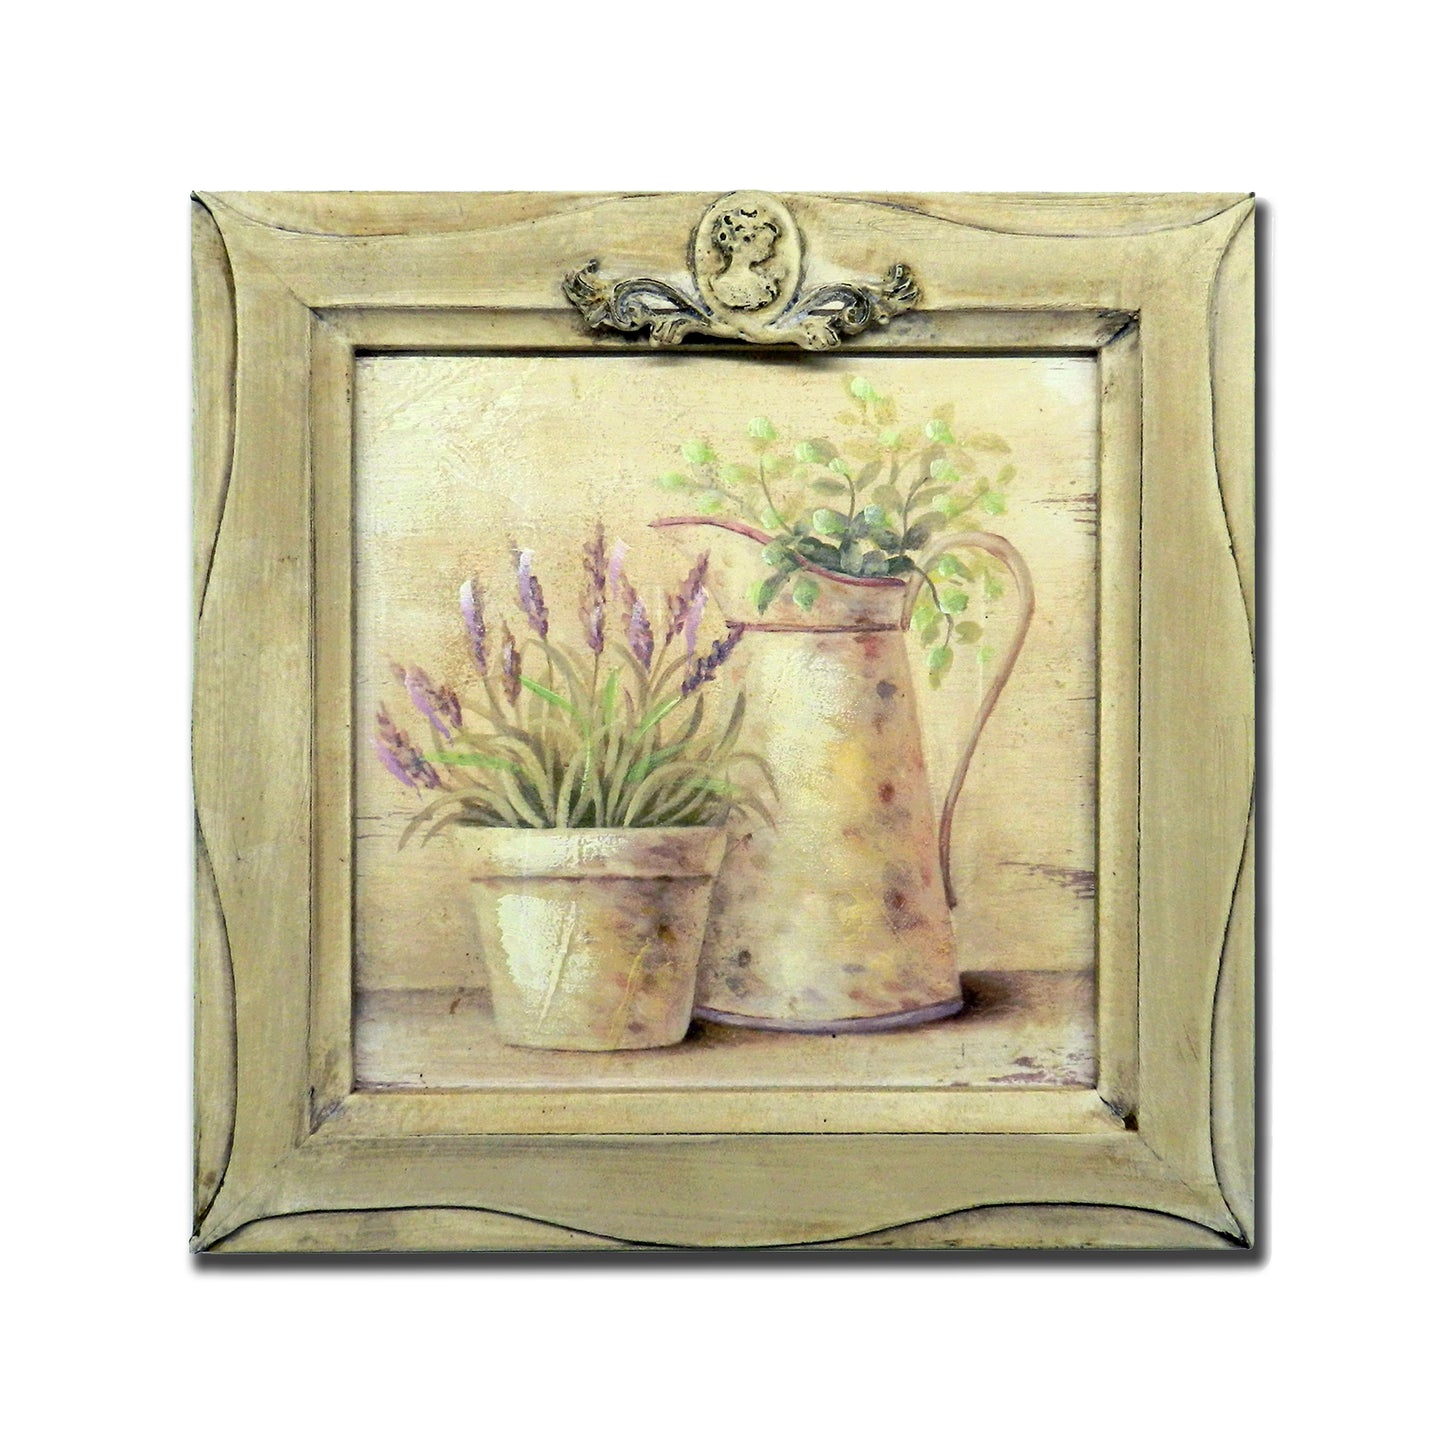 CVHOMEDECO. Country Vintage Hand Painted Wooden Frame Wall Hanging 3D Painting Landscape Art Décor, Plant and Jar Design, 11 x 11 Inch